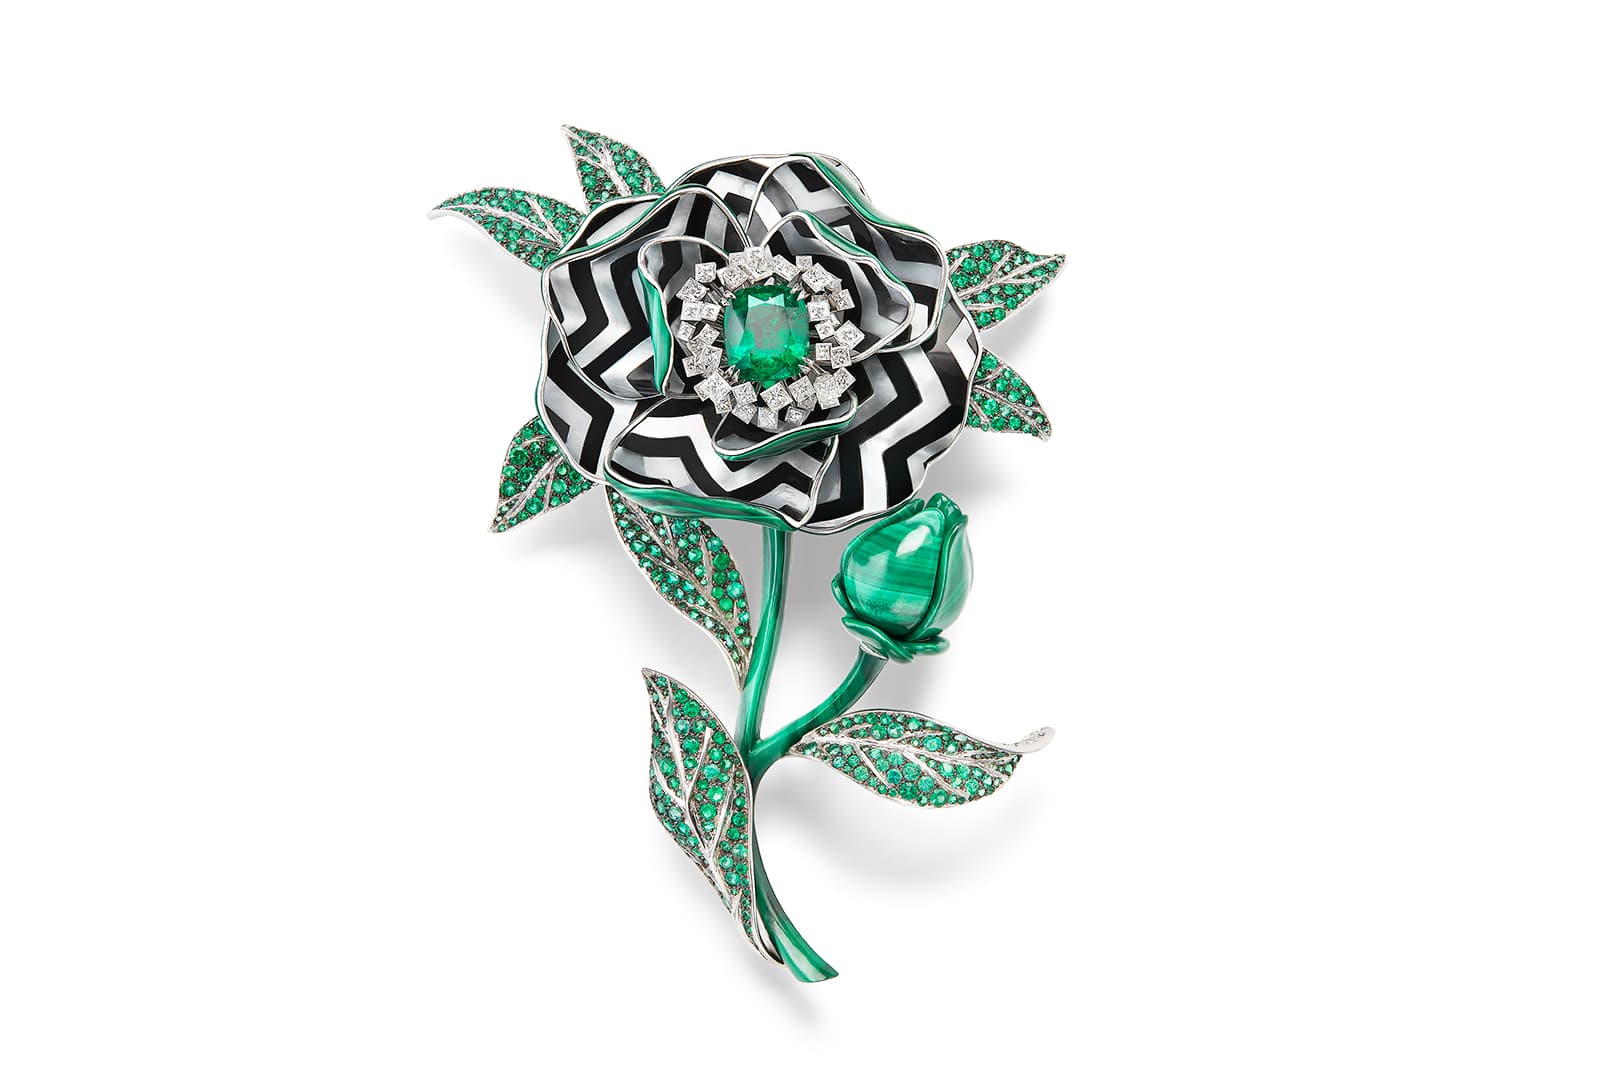 Boucheron 'Nature Triomphante' transformable brooch with malachite, Colombian emerald, emeralds, diamonds, mother-of-pearl and lacquer in white gold